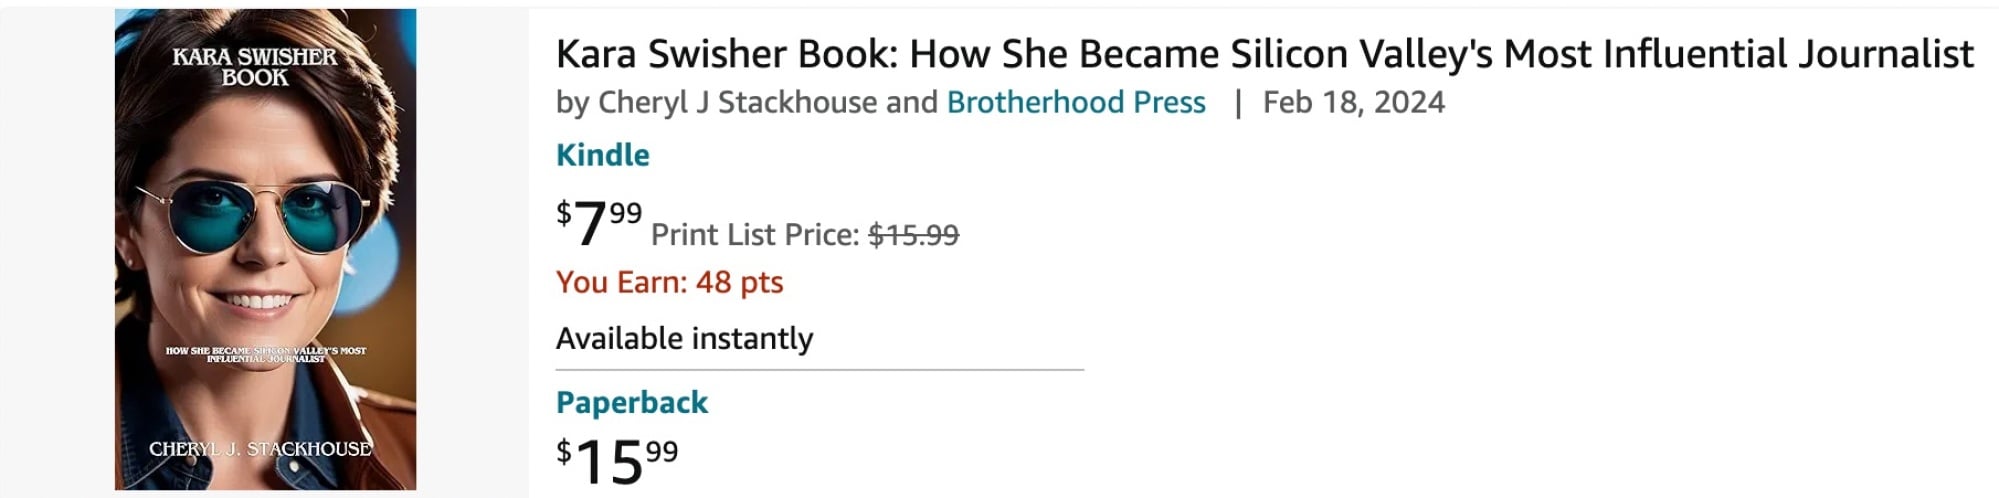 a book about Kara Swisher on Amazon featuring an AI generated image of Swisher